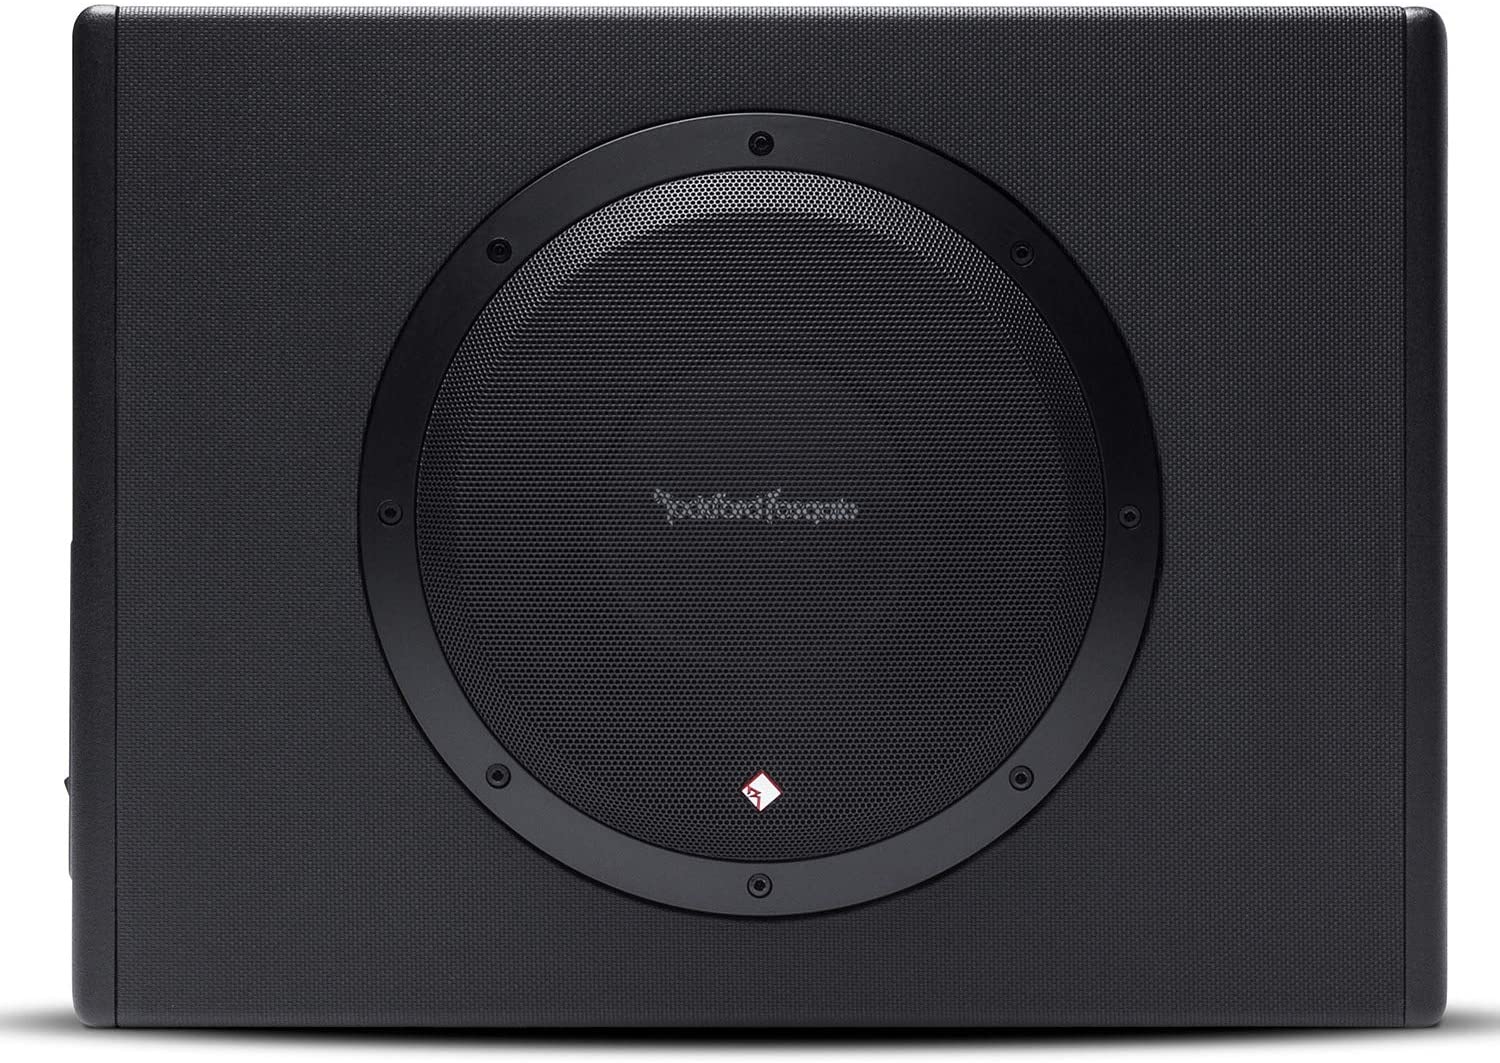 Best Sub And Amp Combo Best Buy, Rockford Fosgate P300-10 Amplified Subwoofer